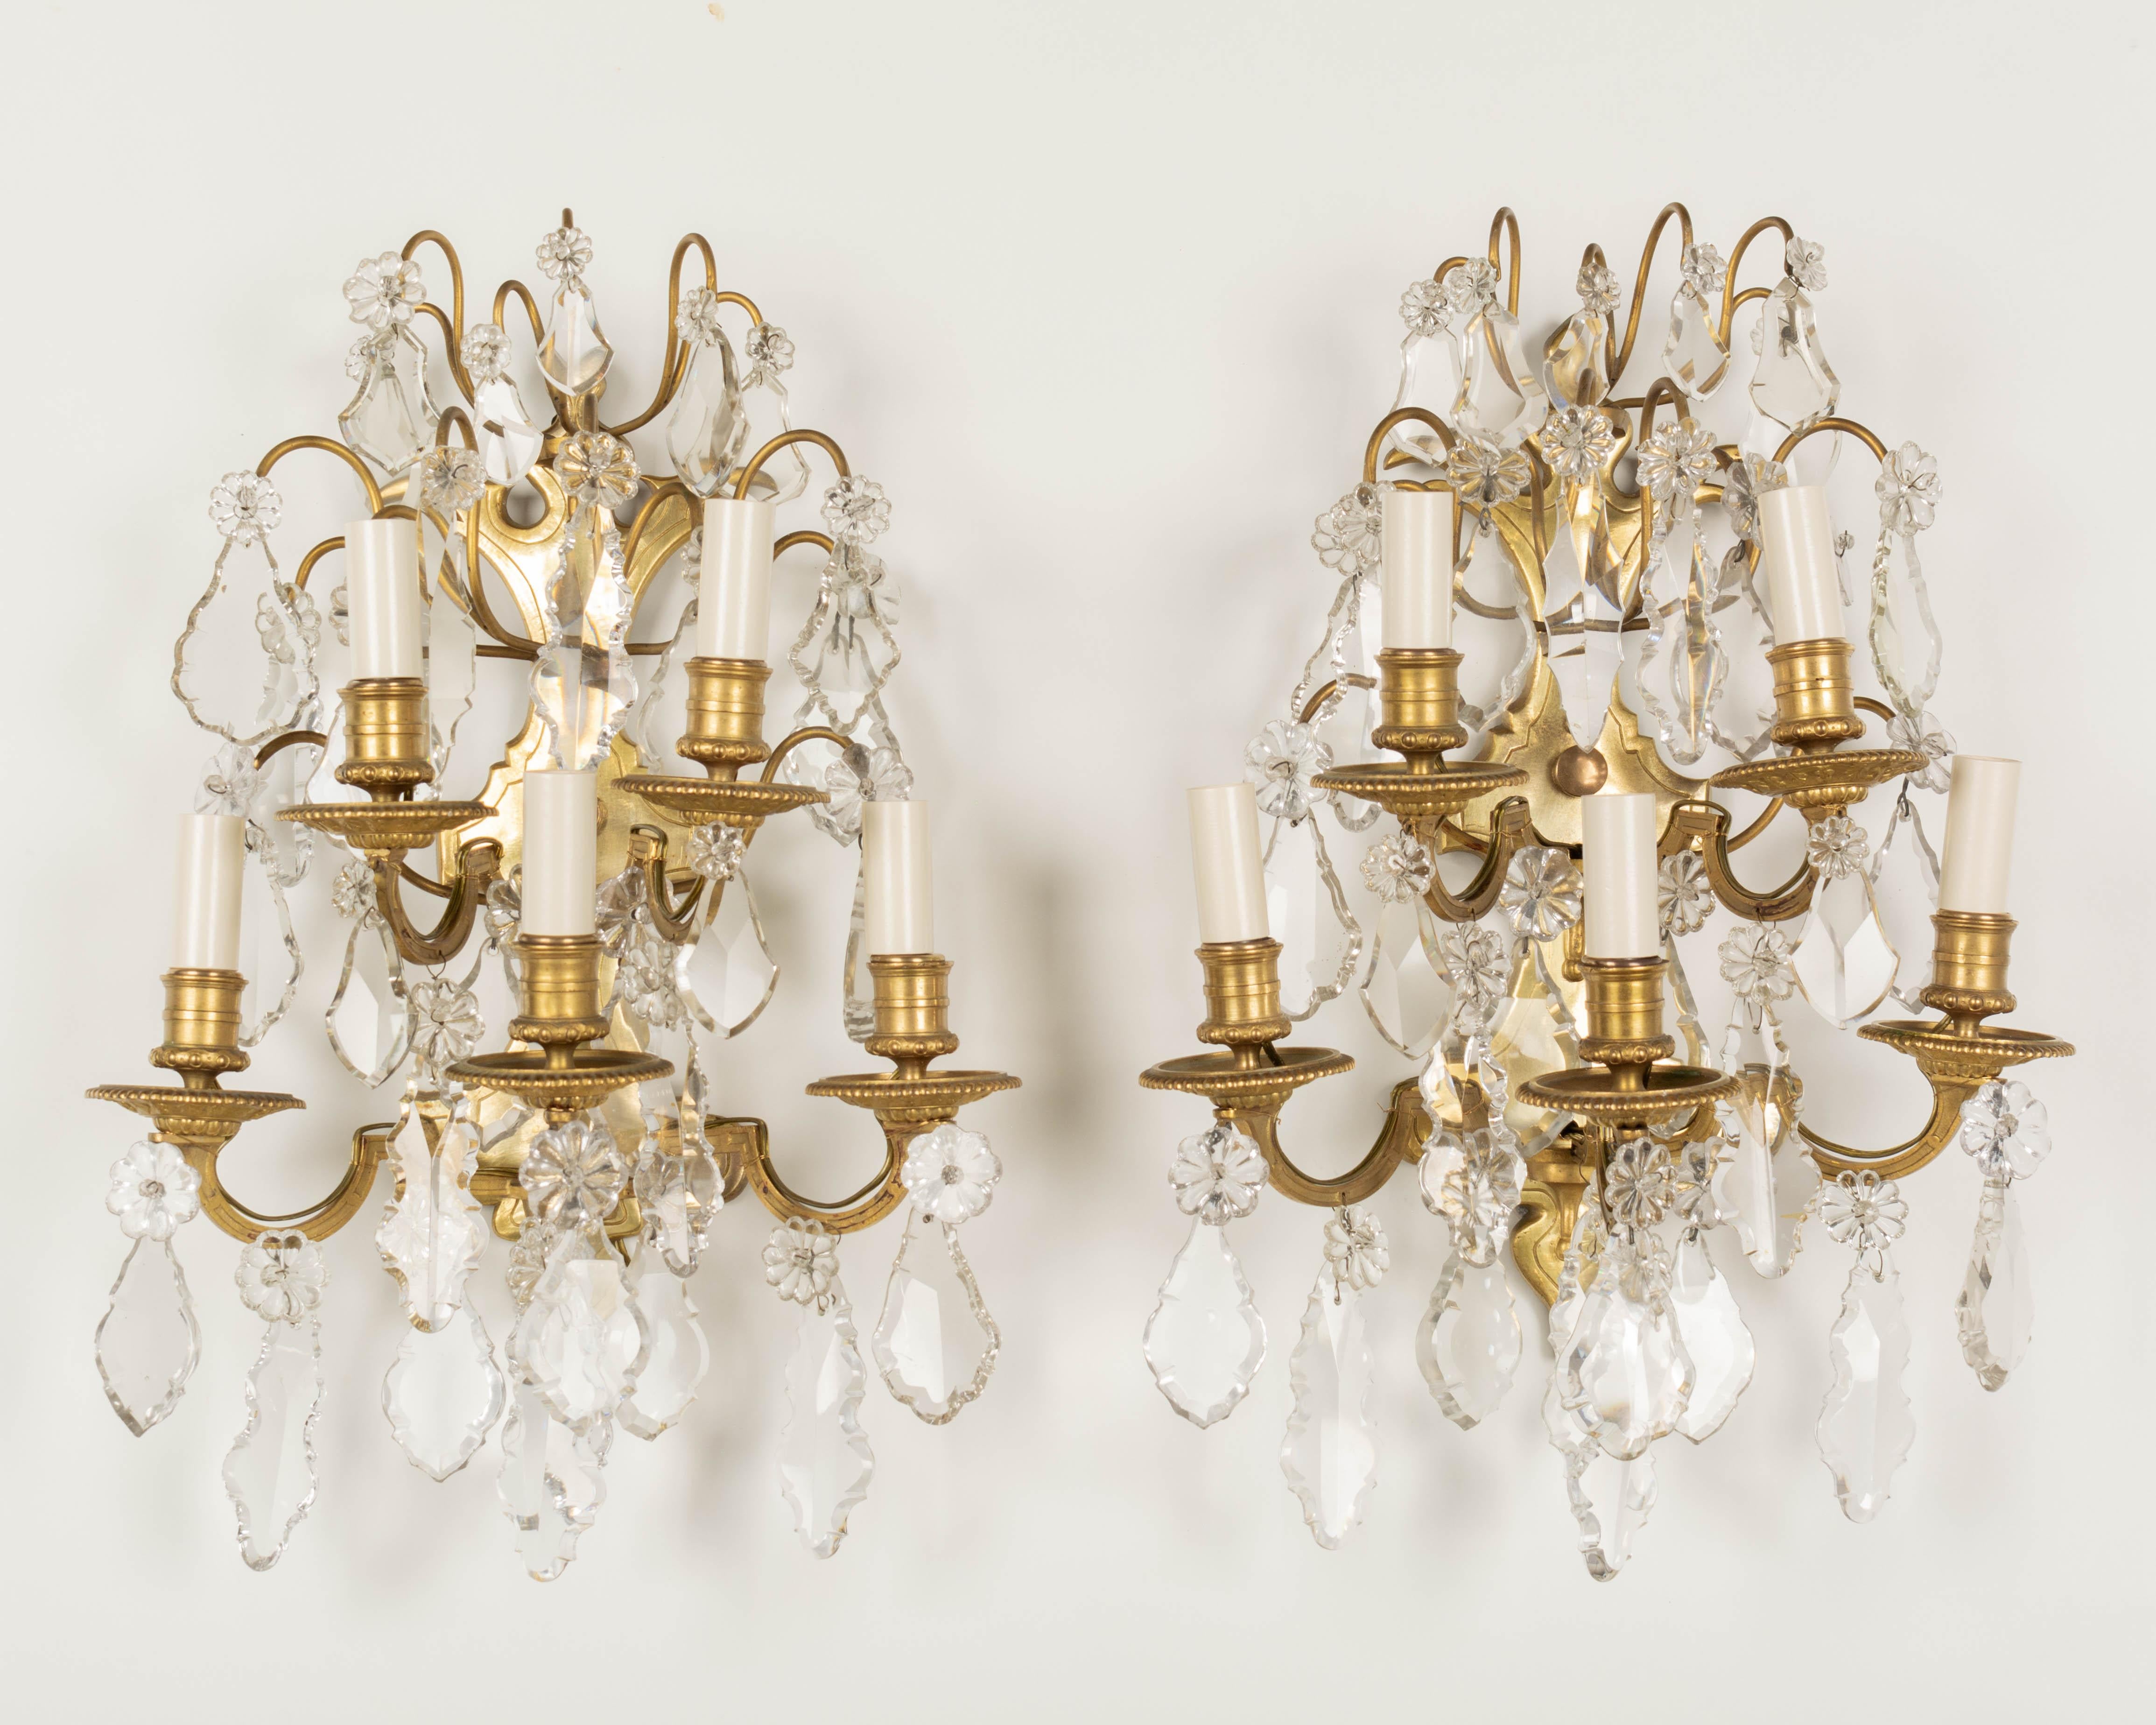 A pair of Louis XV style French Art Deco Period cast bronze and crystal sconces. Good quality heavy casting with five candle lights and a variety of cut crystal prisms and pendalogues. Rewired with new sockets and candle covers.